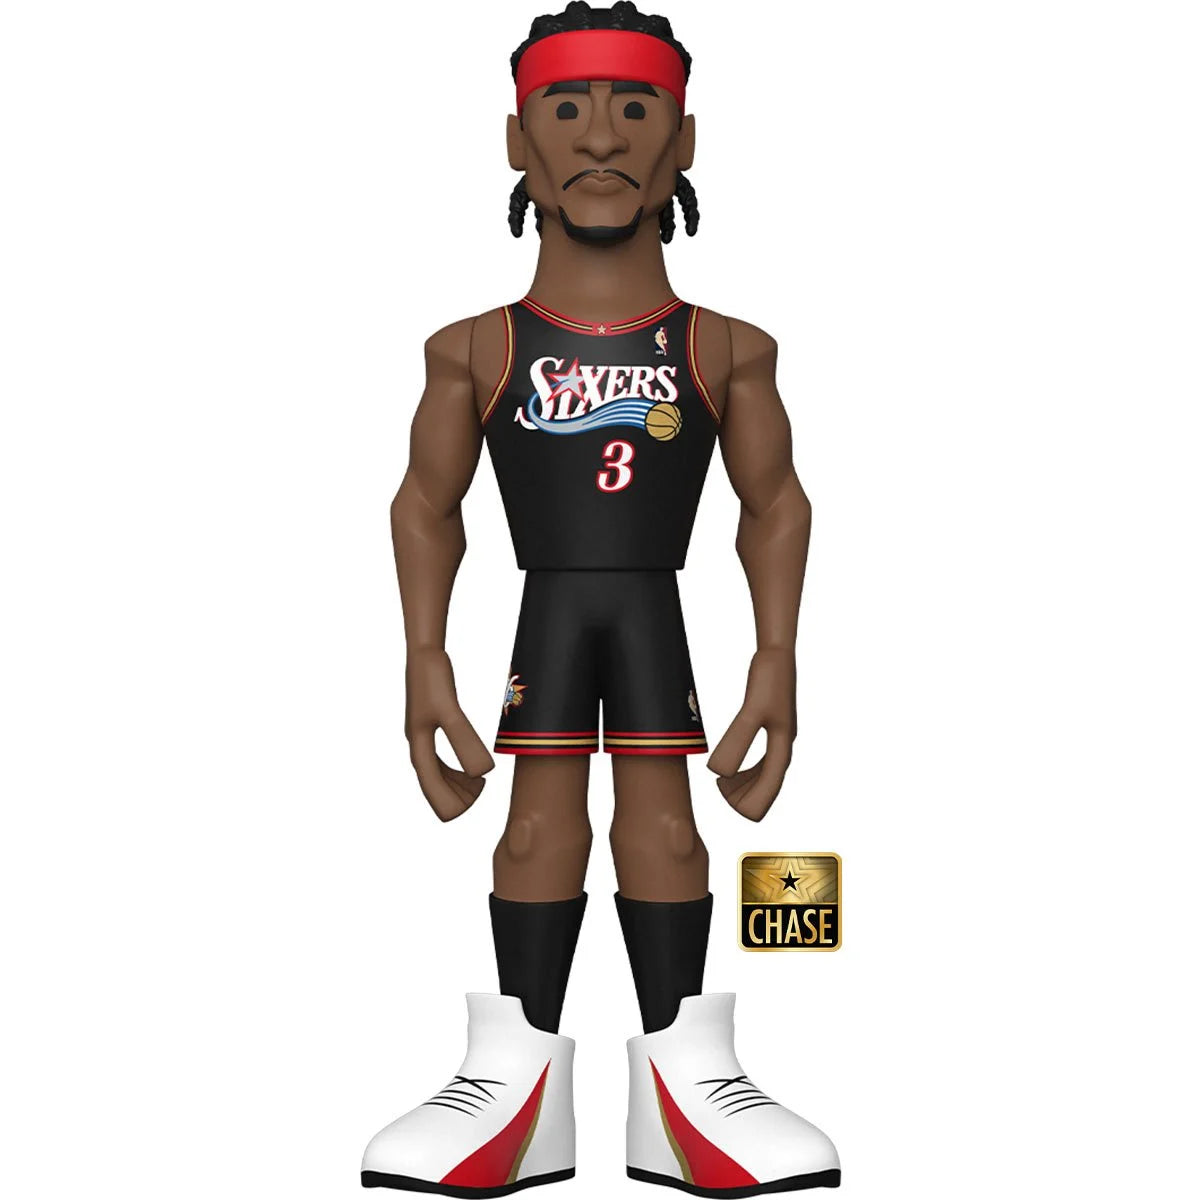 Allen Iverson 76ers NBA Legends 12-Inch Funko Vinyl Gold Figure w/ Chance of chase!